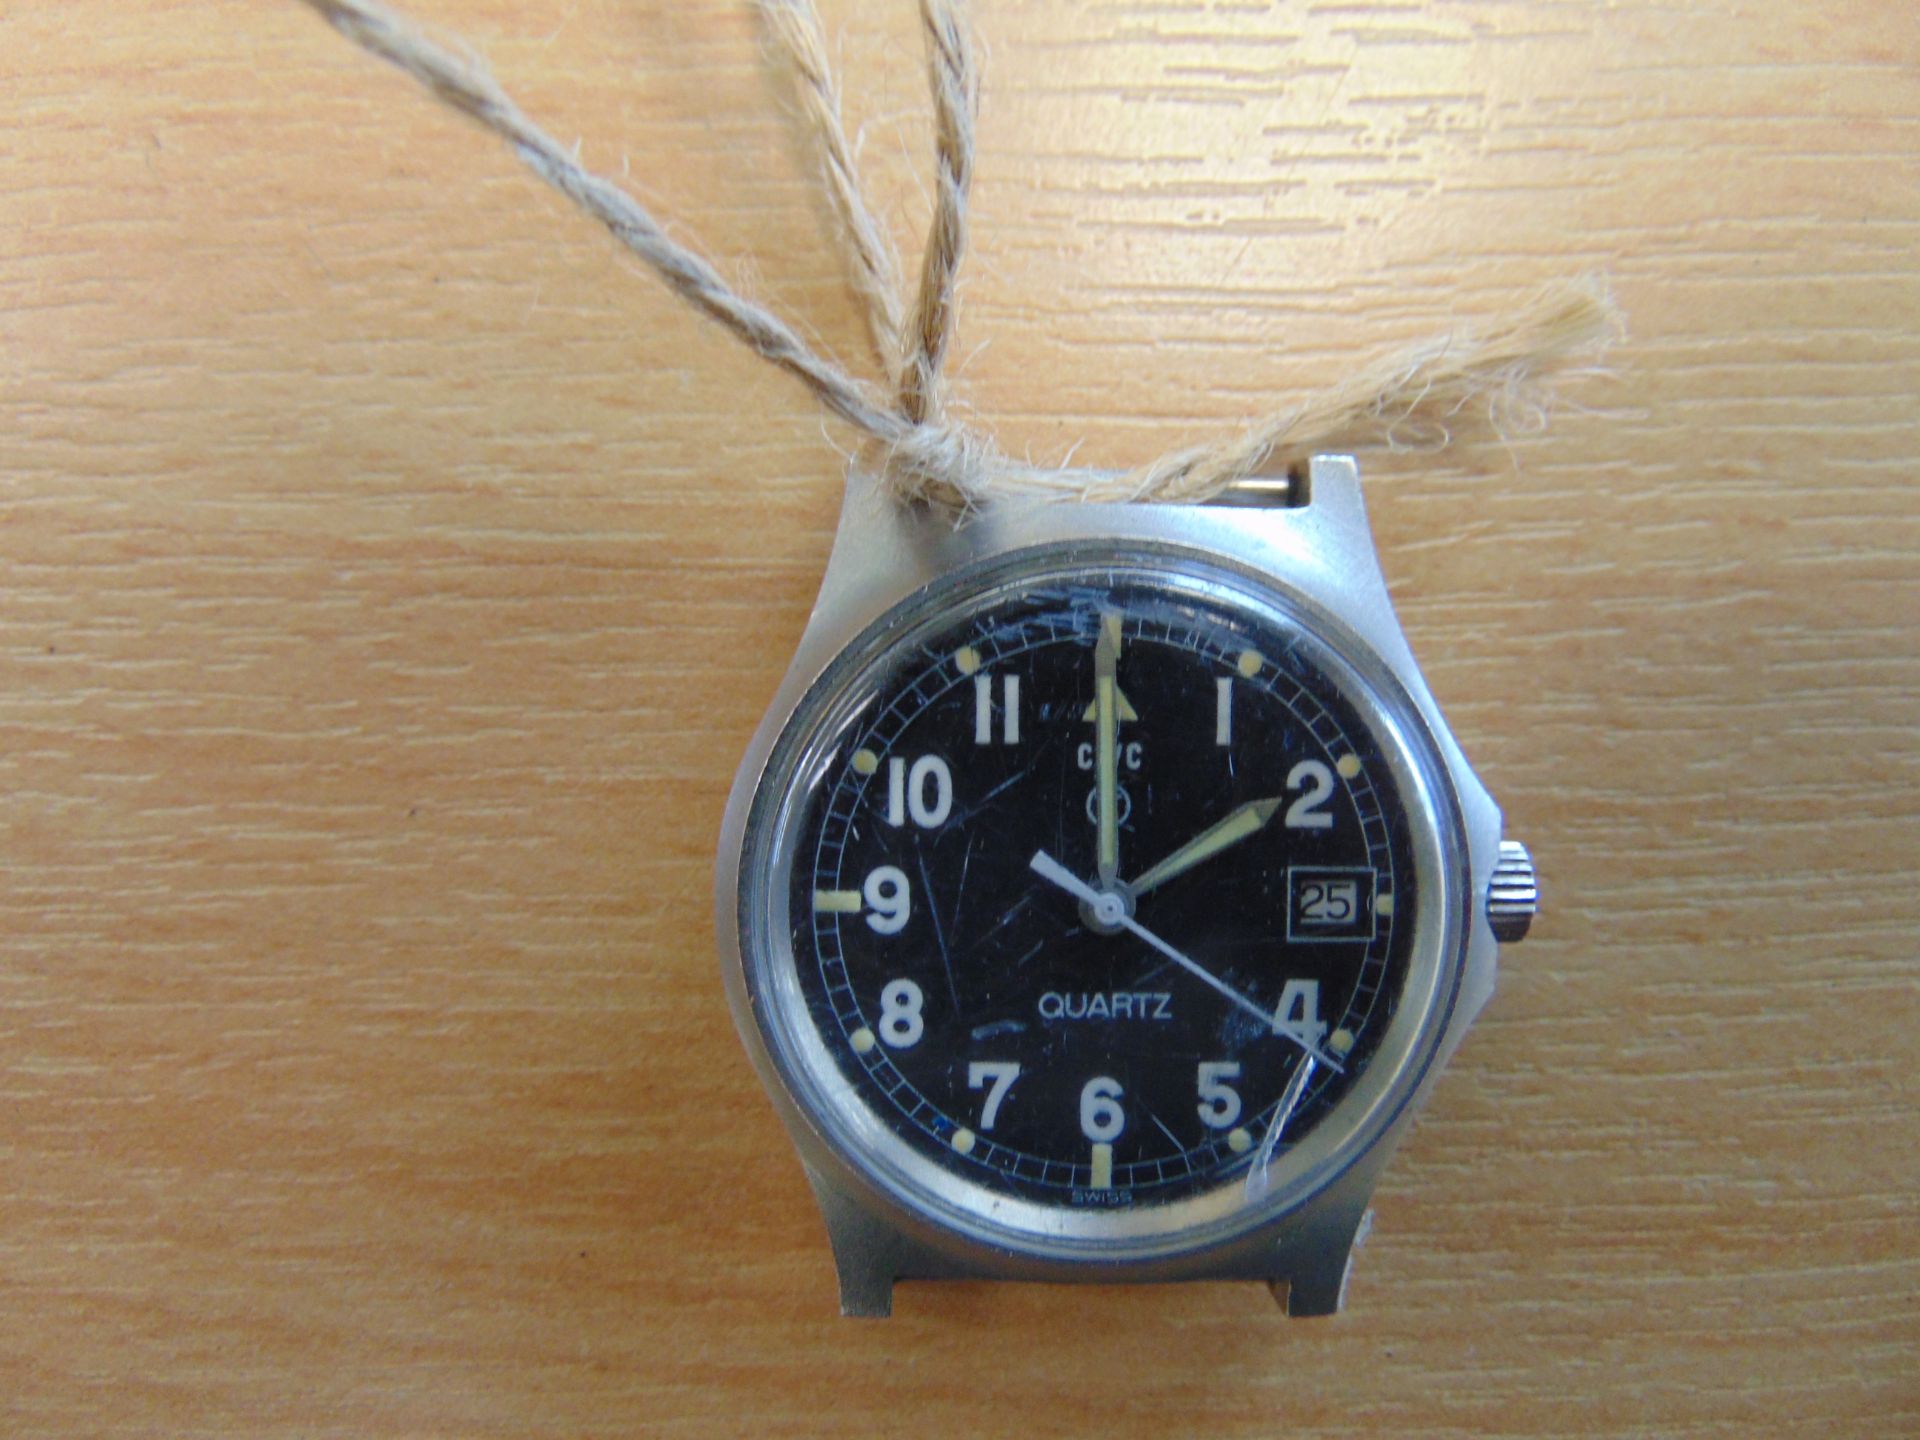 V.Rare CWC (Cabot Watch Co Switzerland), British Army FAT BOY Service Watch with Date Adjust 1981 - Image 3 of 5